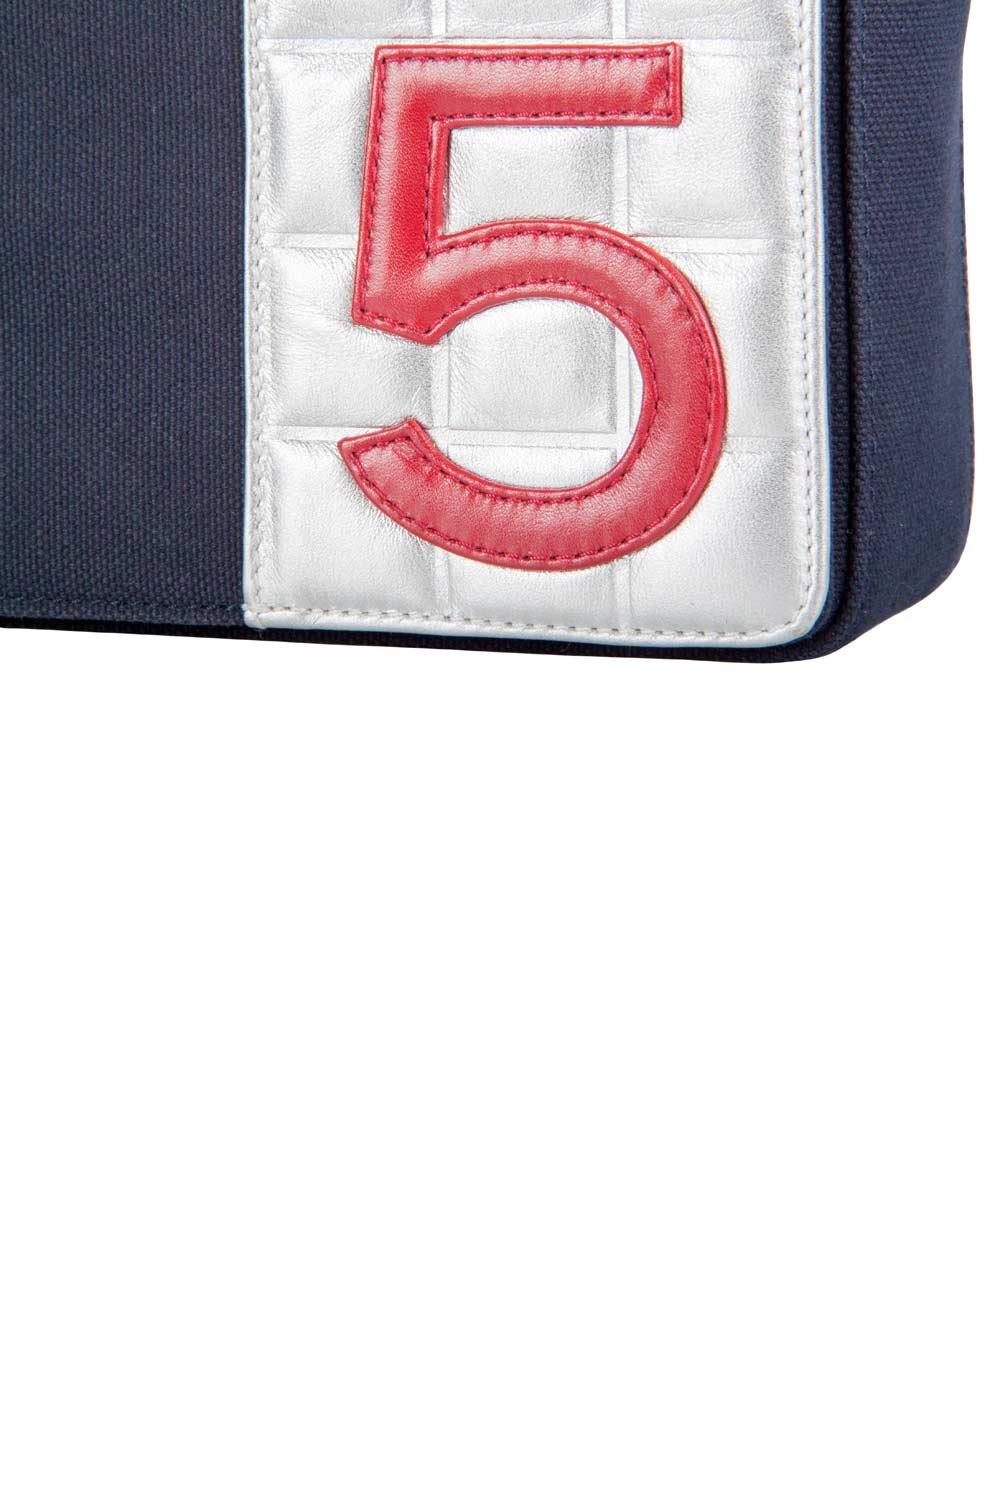 Chanel Multicolor Canvas and Leather No. 5 Flap Bag 1